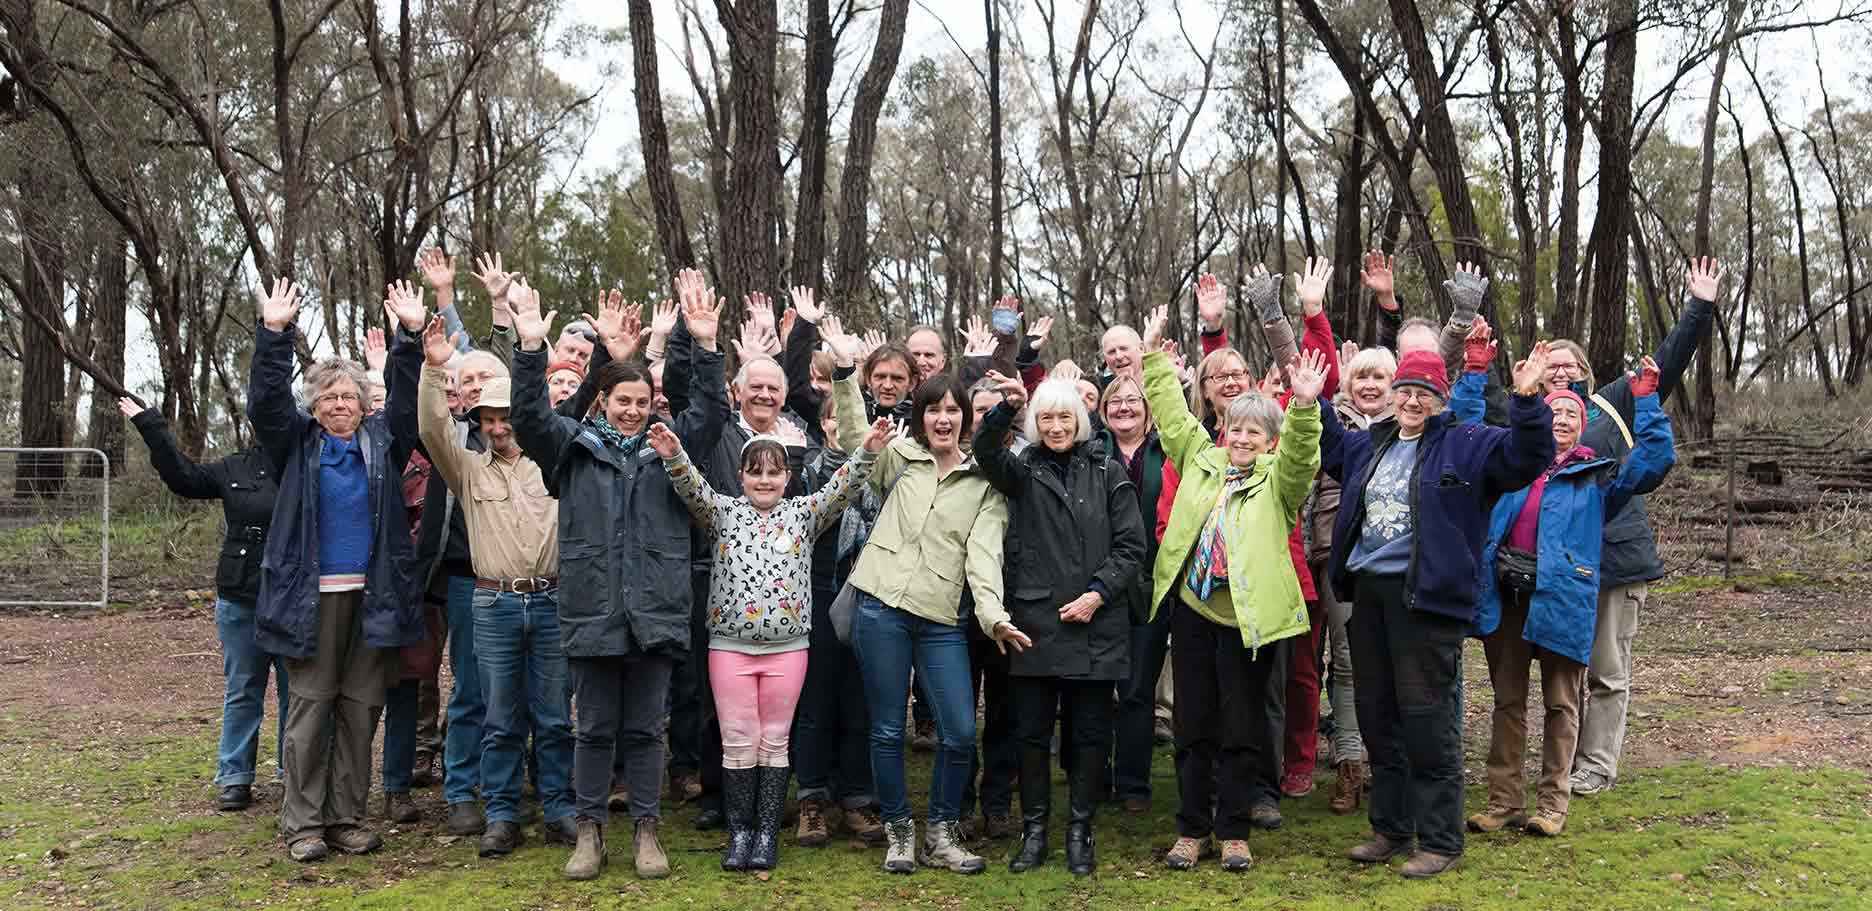 Citizen science was the focus of the 4th Annual Water Science Forum in Bendigo in June 2016.